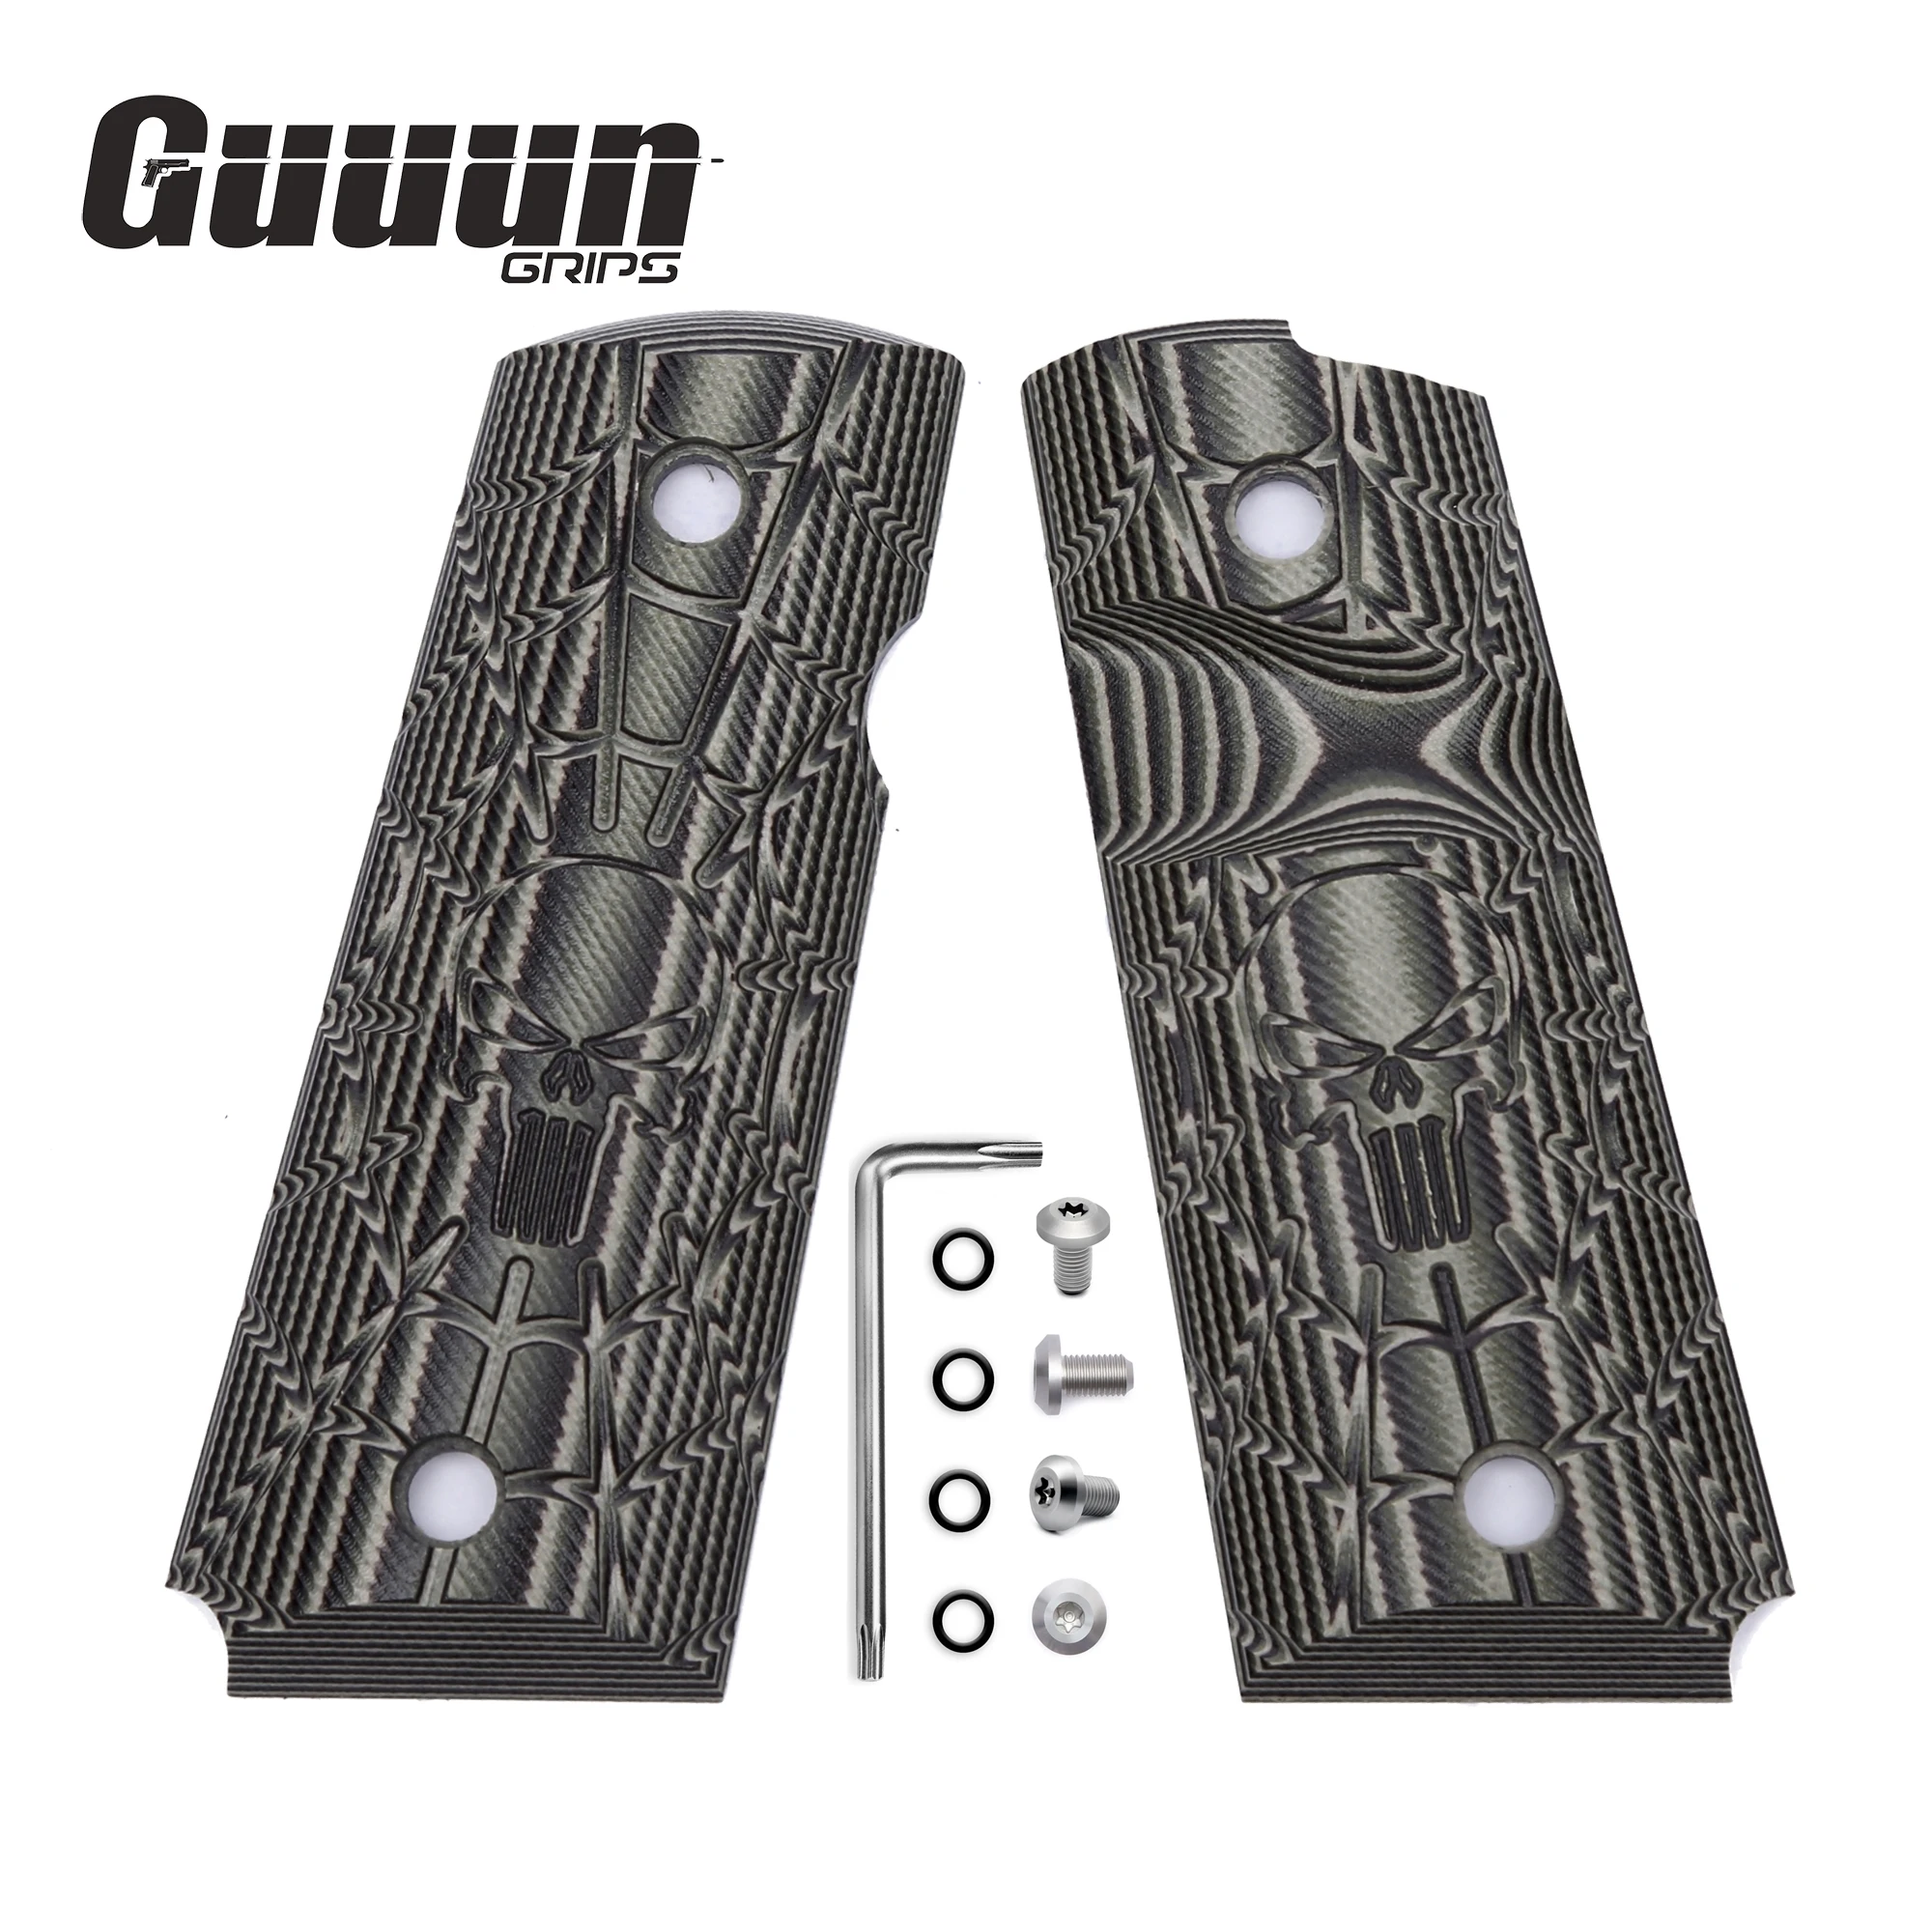 Guuun G10 Grips for 1911 Compact/Officer Skull Skeleton Punisher Texture 5 Color Options 